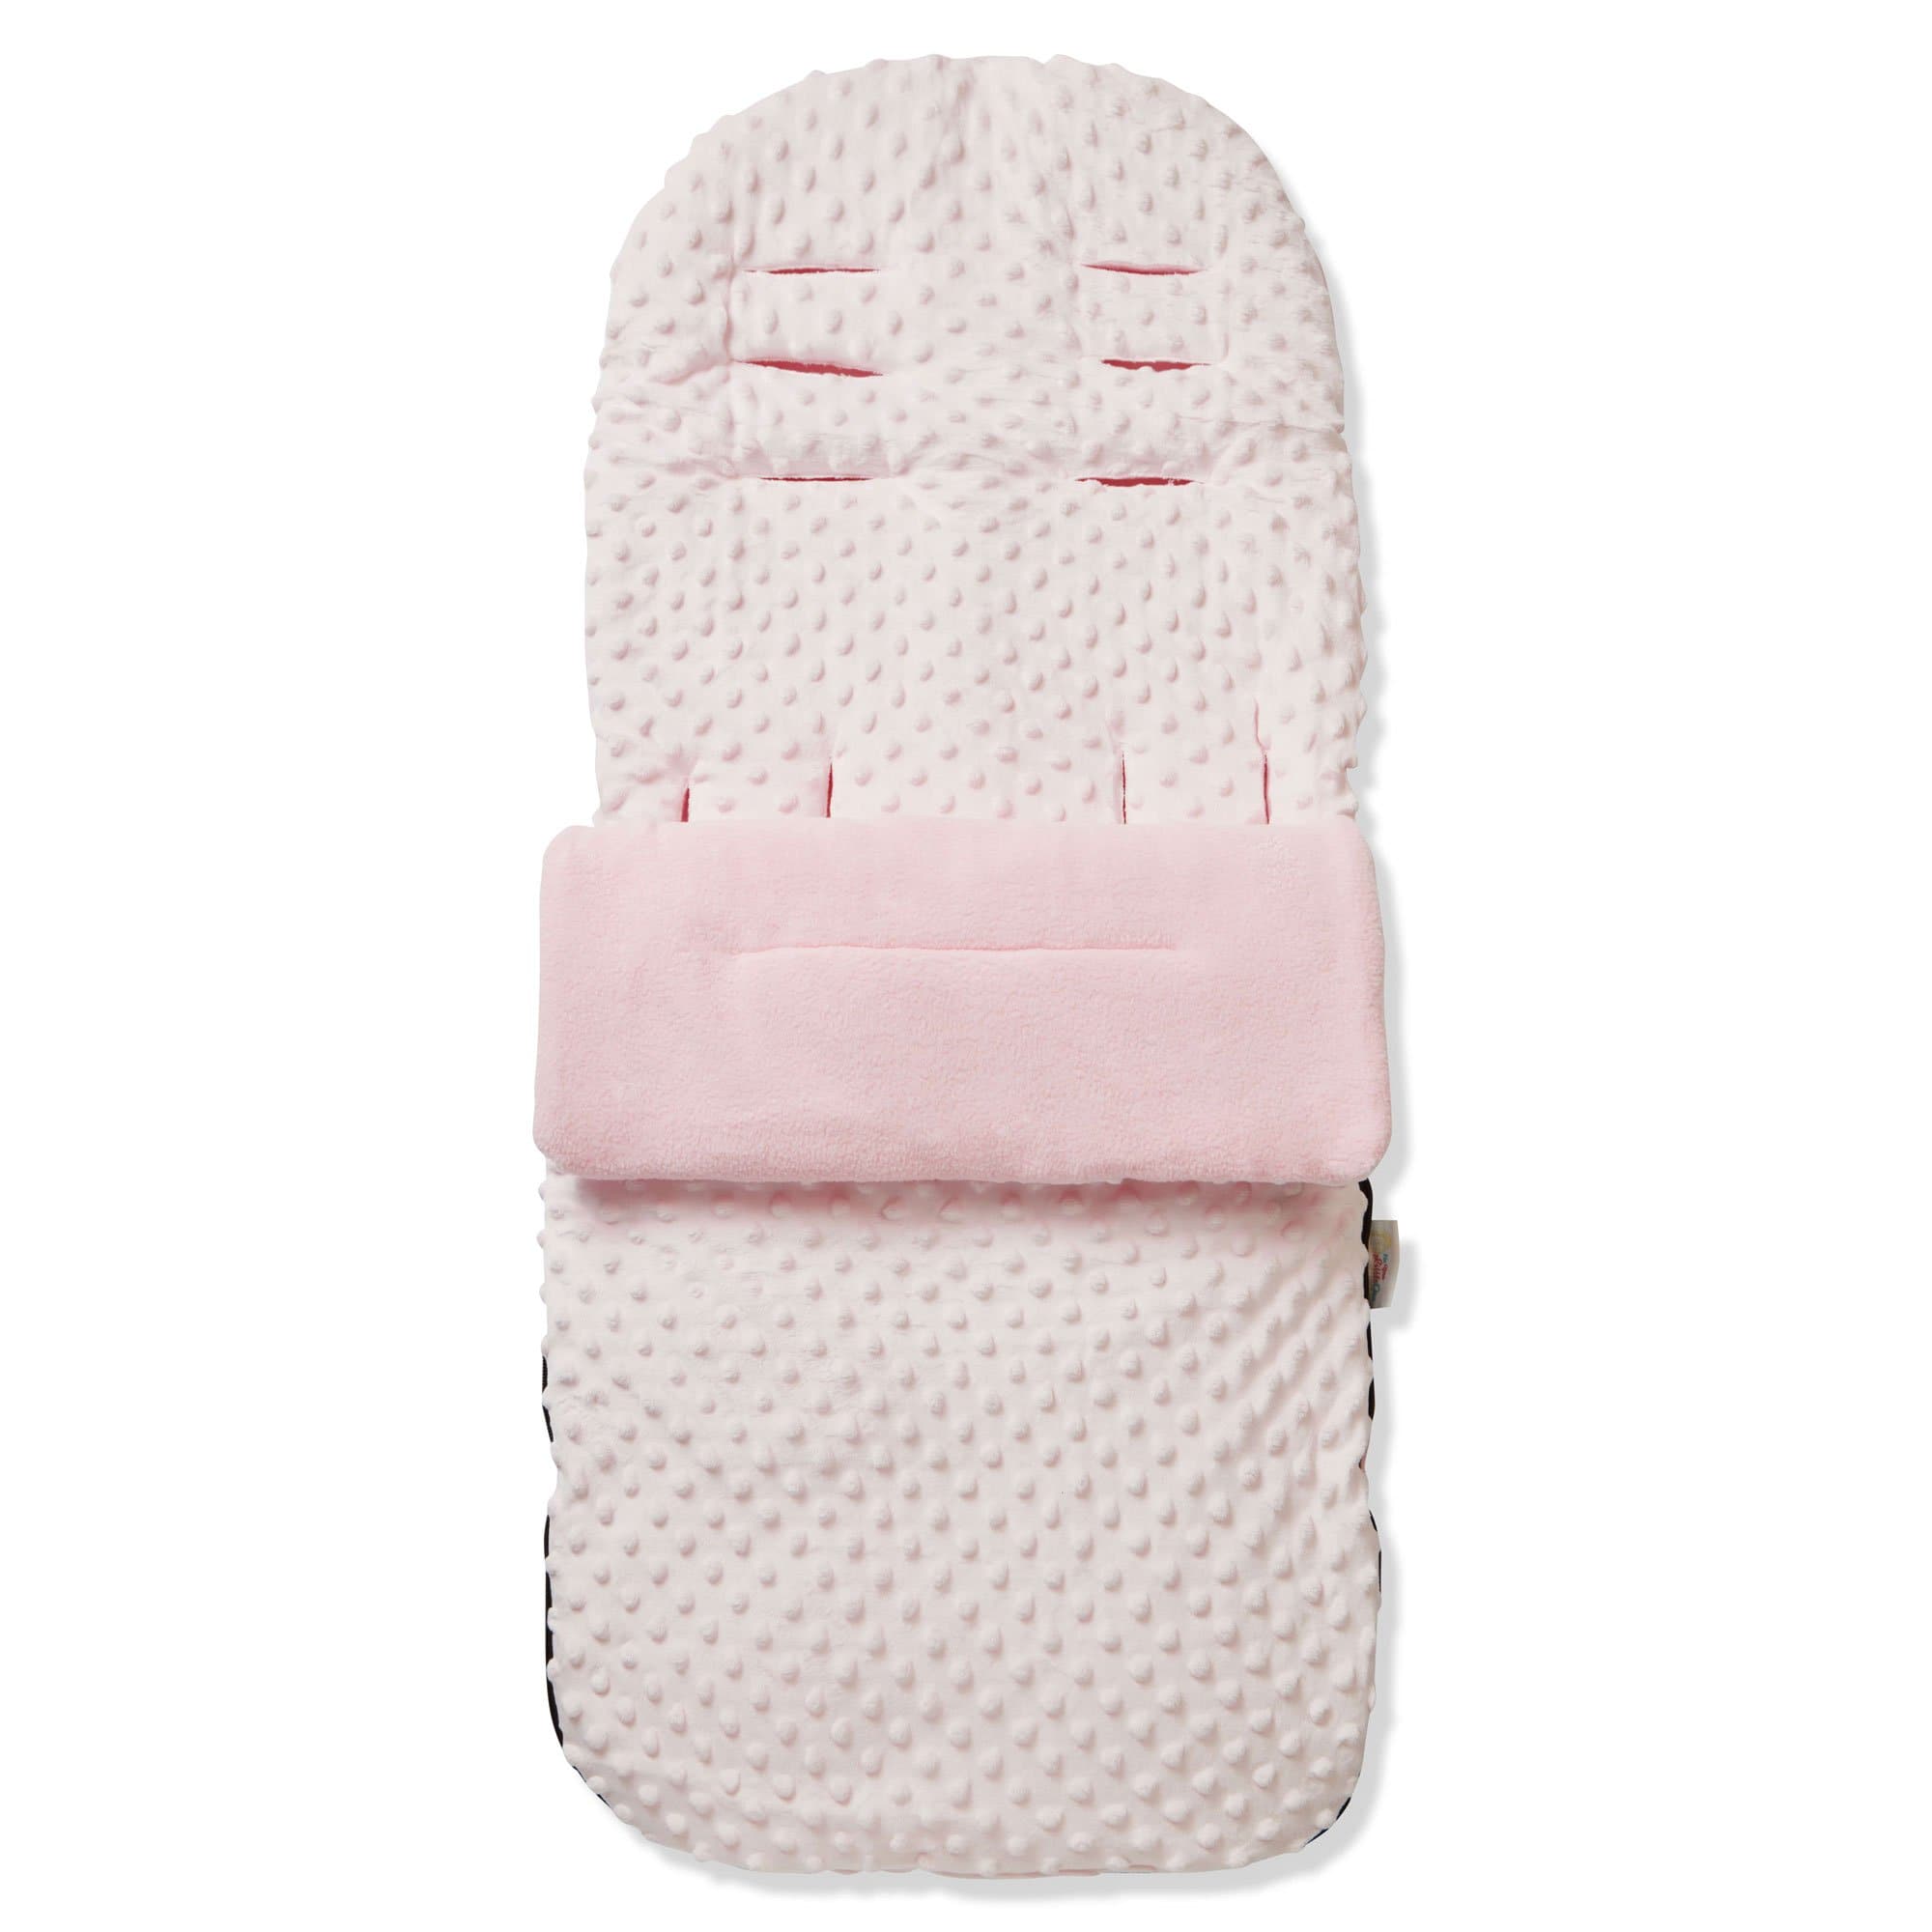 Dimple Footmuff / Cosy Toes Compatible with Stokke - Pink / Fits All Models | For Your Little One